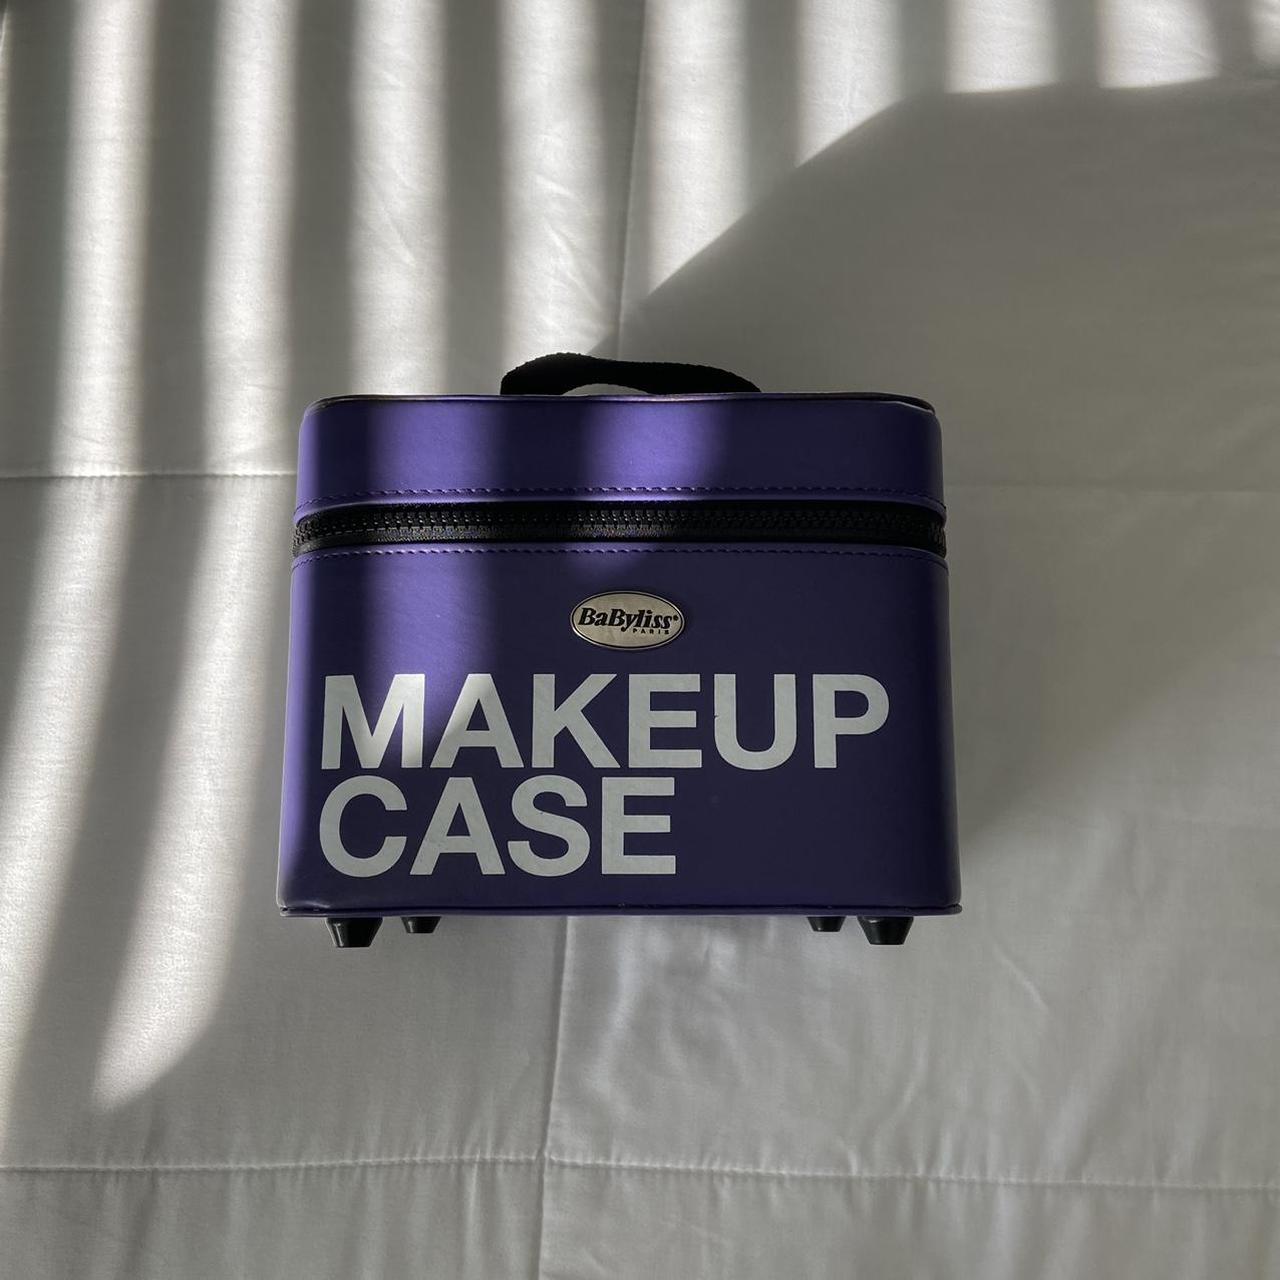 Product Image 1 - Purple Makeup Case

Shipping $6.75

In good